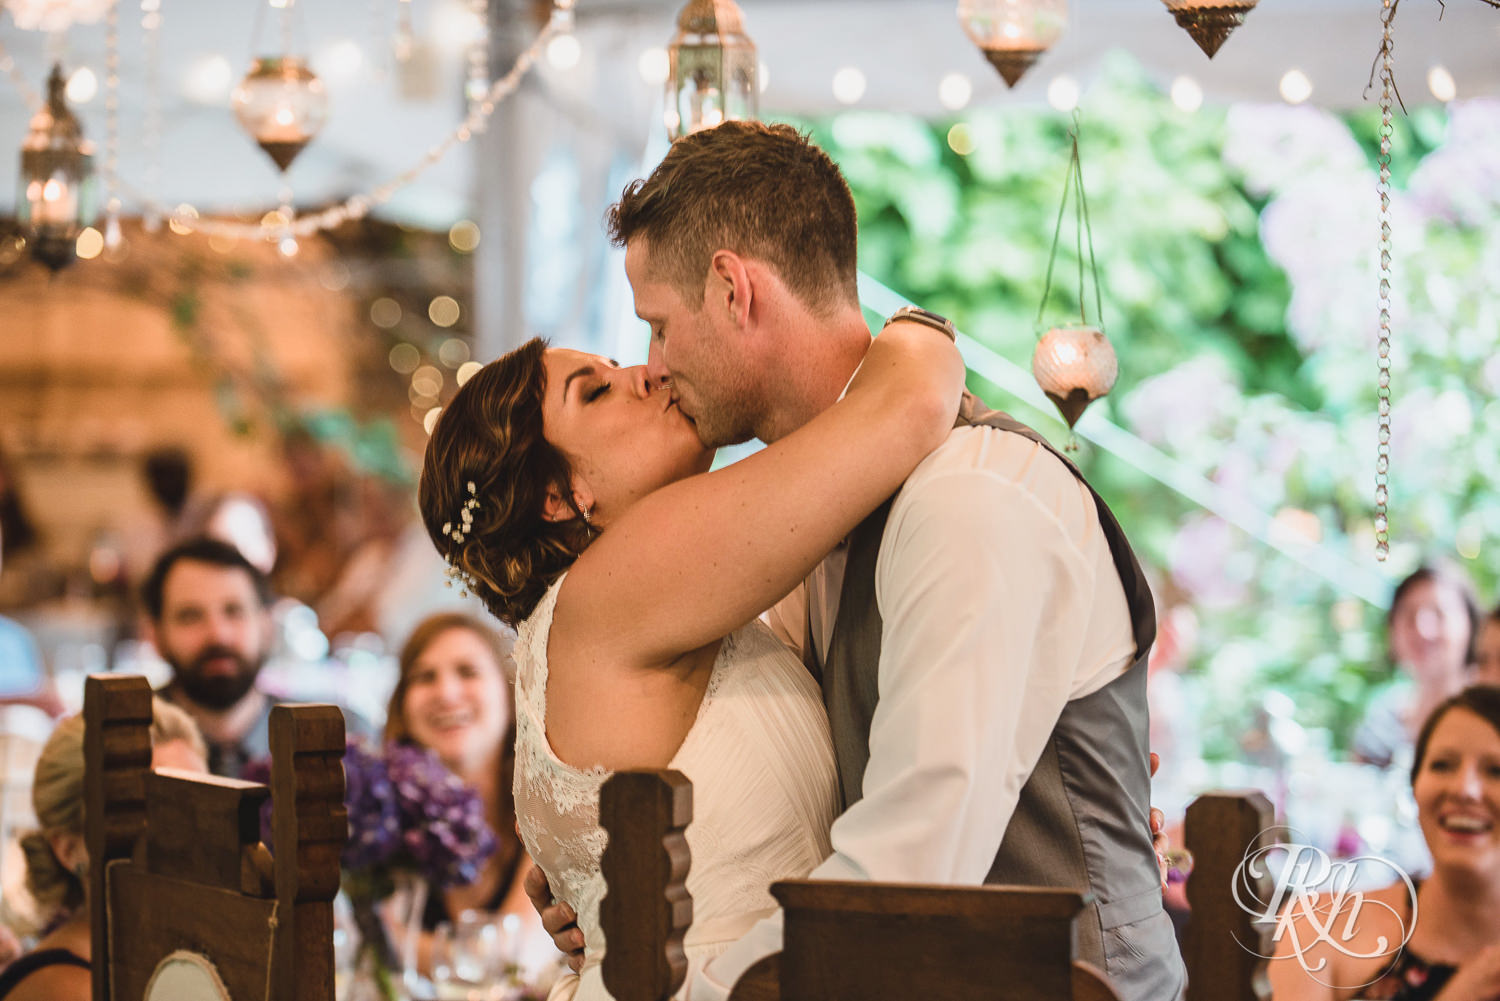 Bride and groom kiss during reception at Camrose Hill Flower Farm in Stillwater, Minnesota.